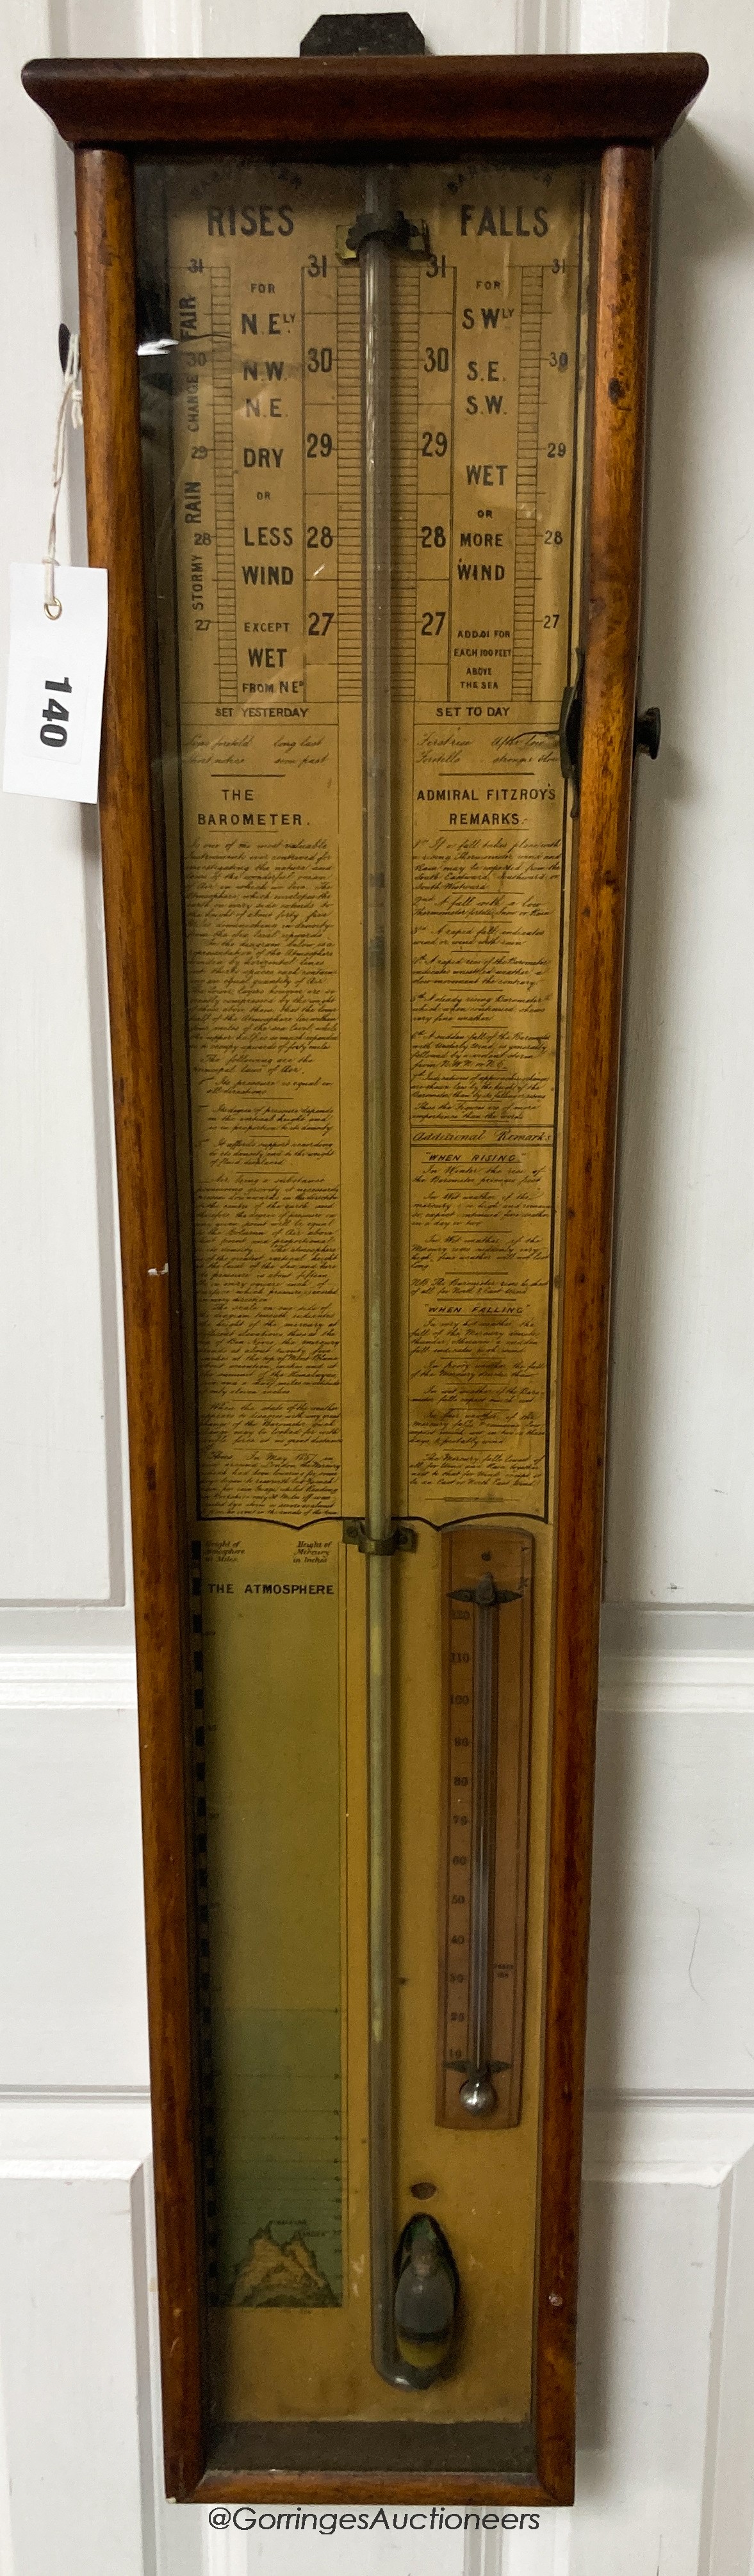 An early 20th century Admiral Fitzroy barometer, height 90cm                                                                                                                                                                